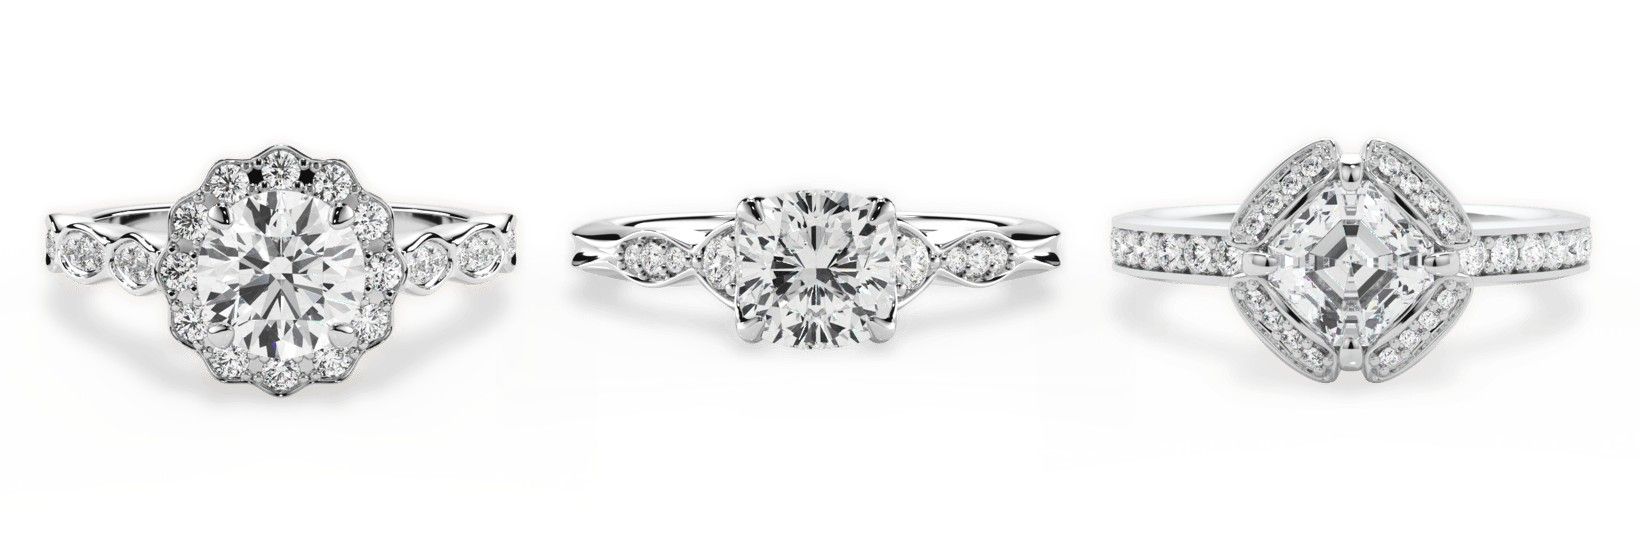 Discover Your Ideal Diamond Engagement Ring: Choices for Every Style  image1